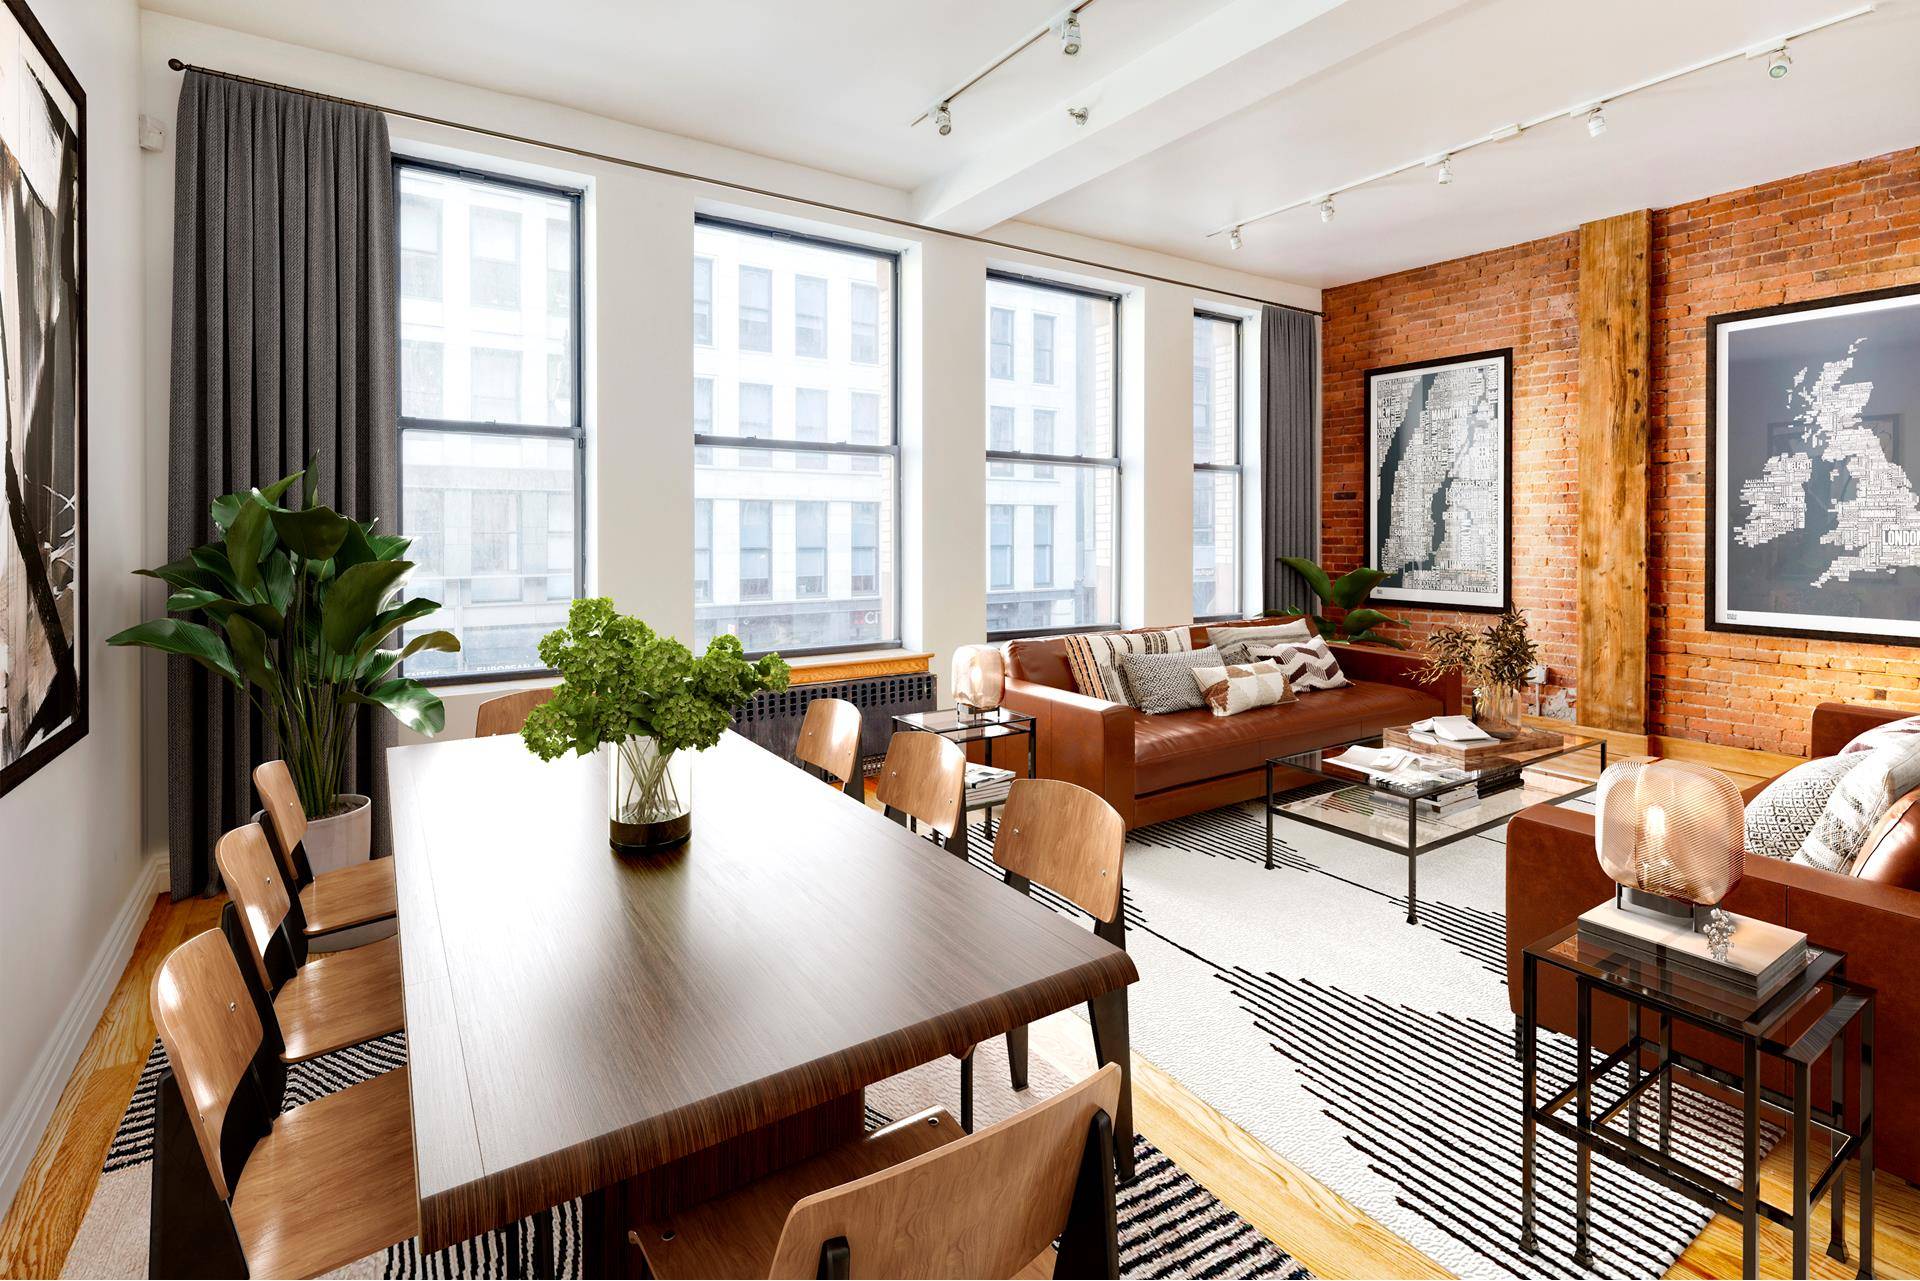 Welcome home to 92 Chambers Street, a boutique condominium building situated in the heart of Tribeca !